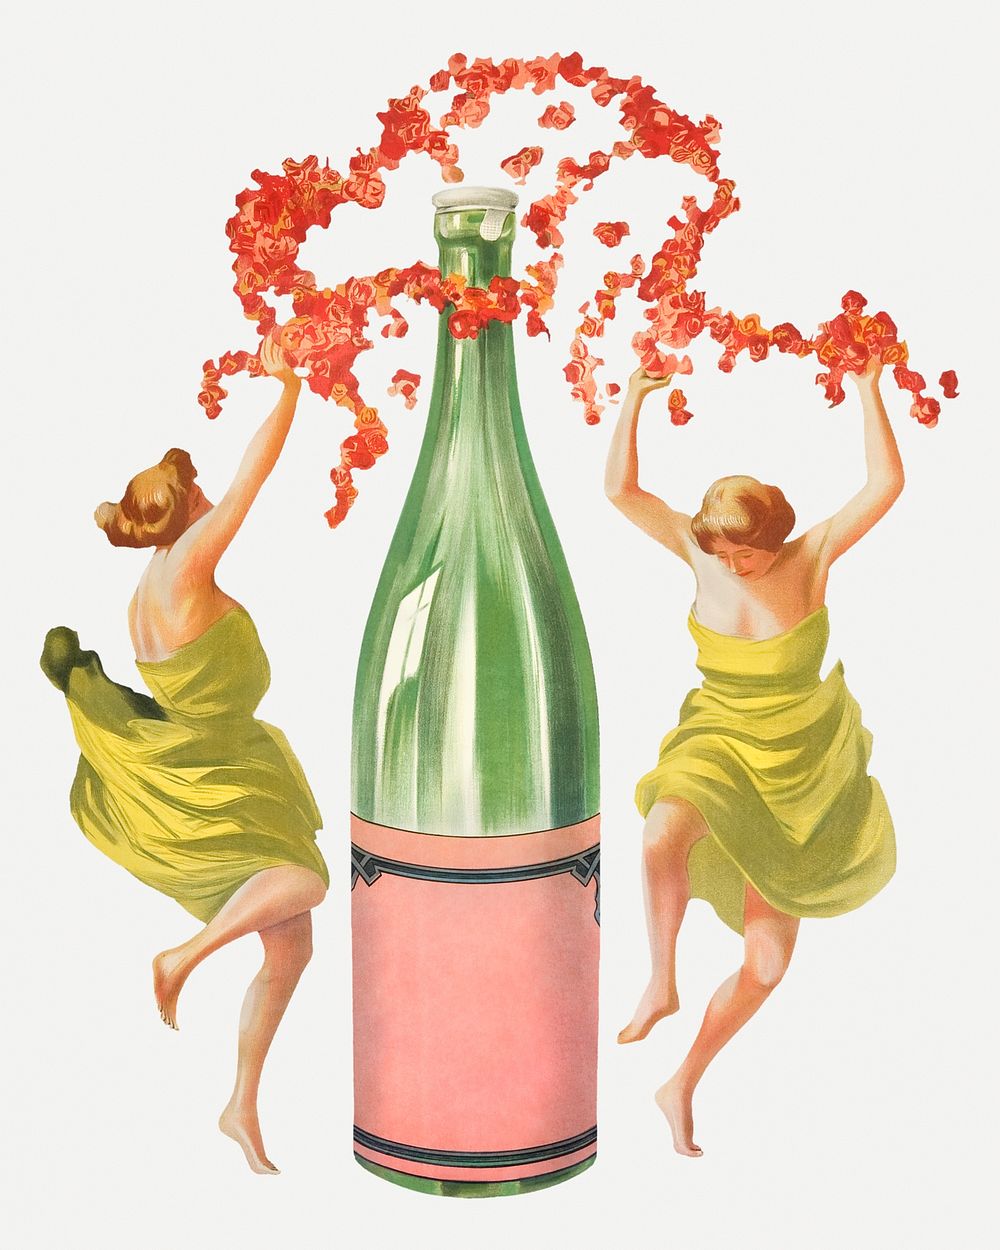 Mineral water bottle psd with women illustration, remixed from artworks by Leonetto Cappiello